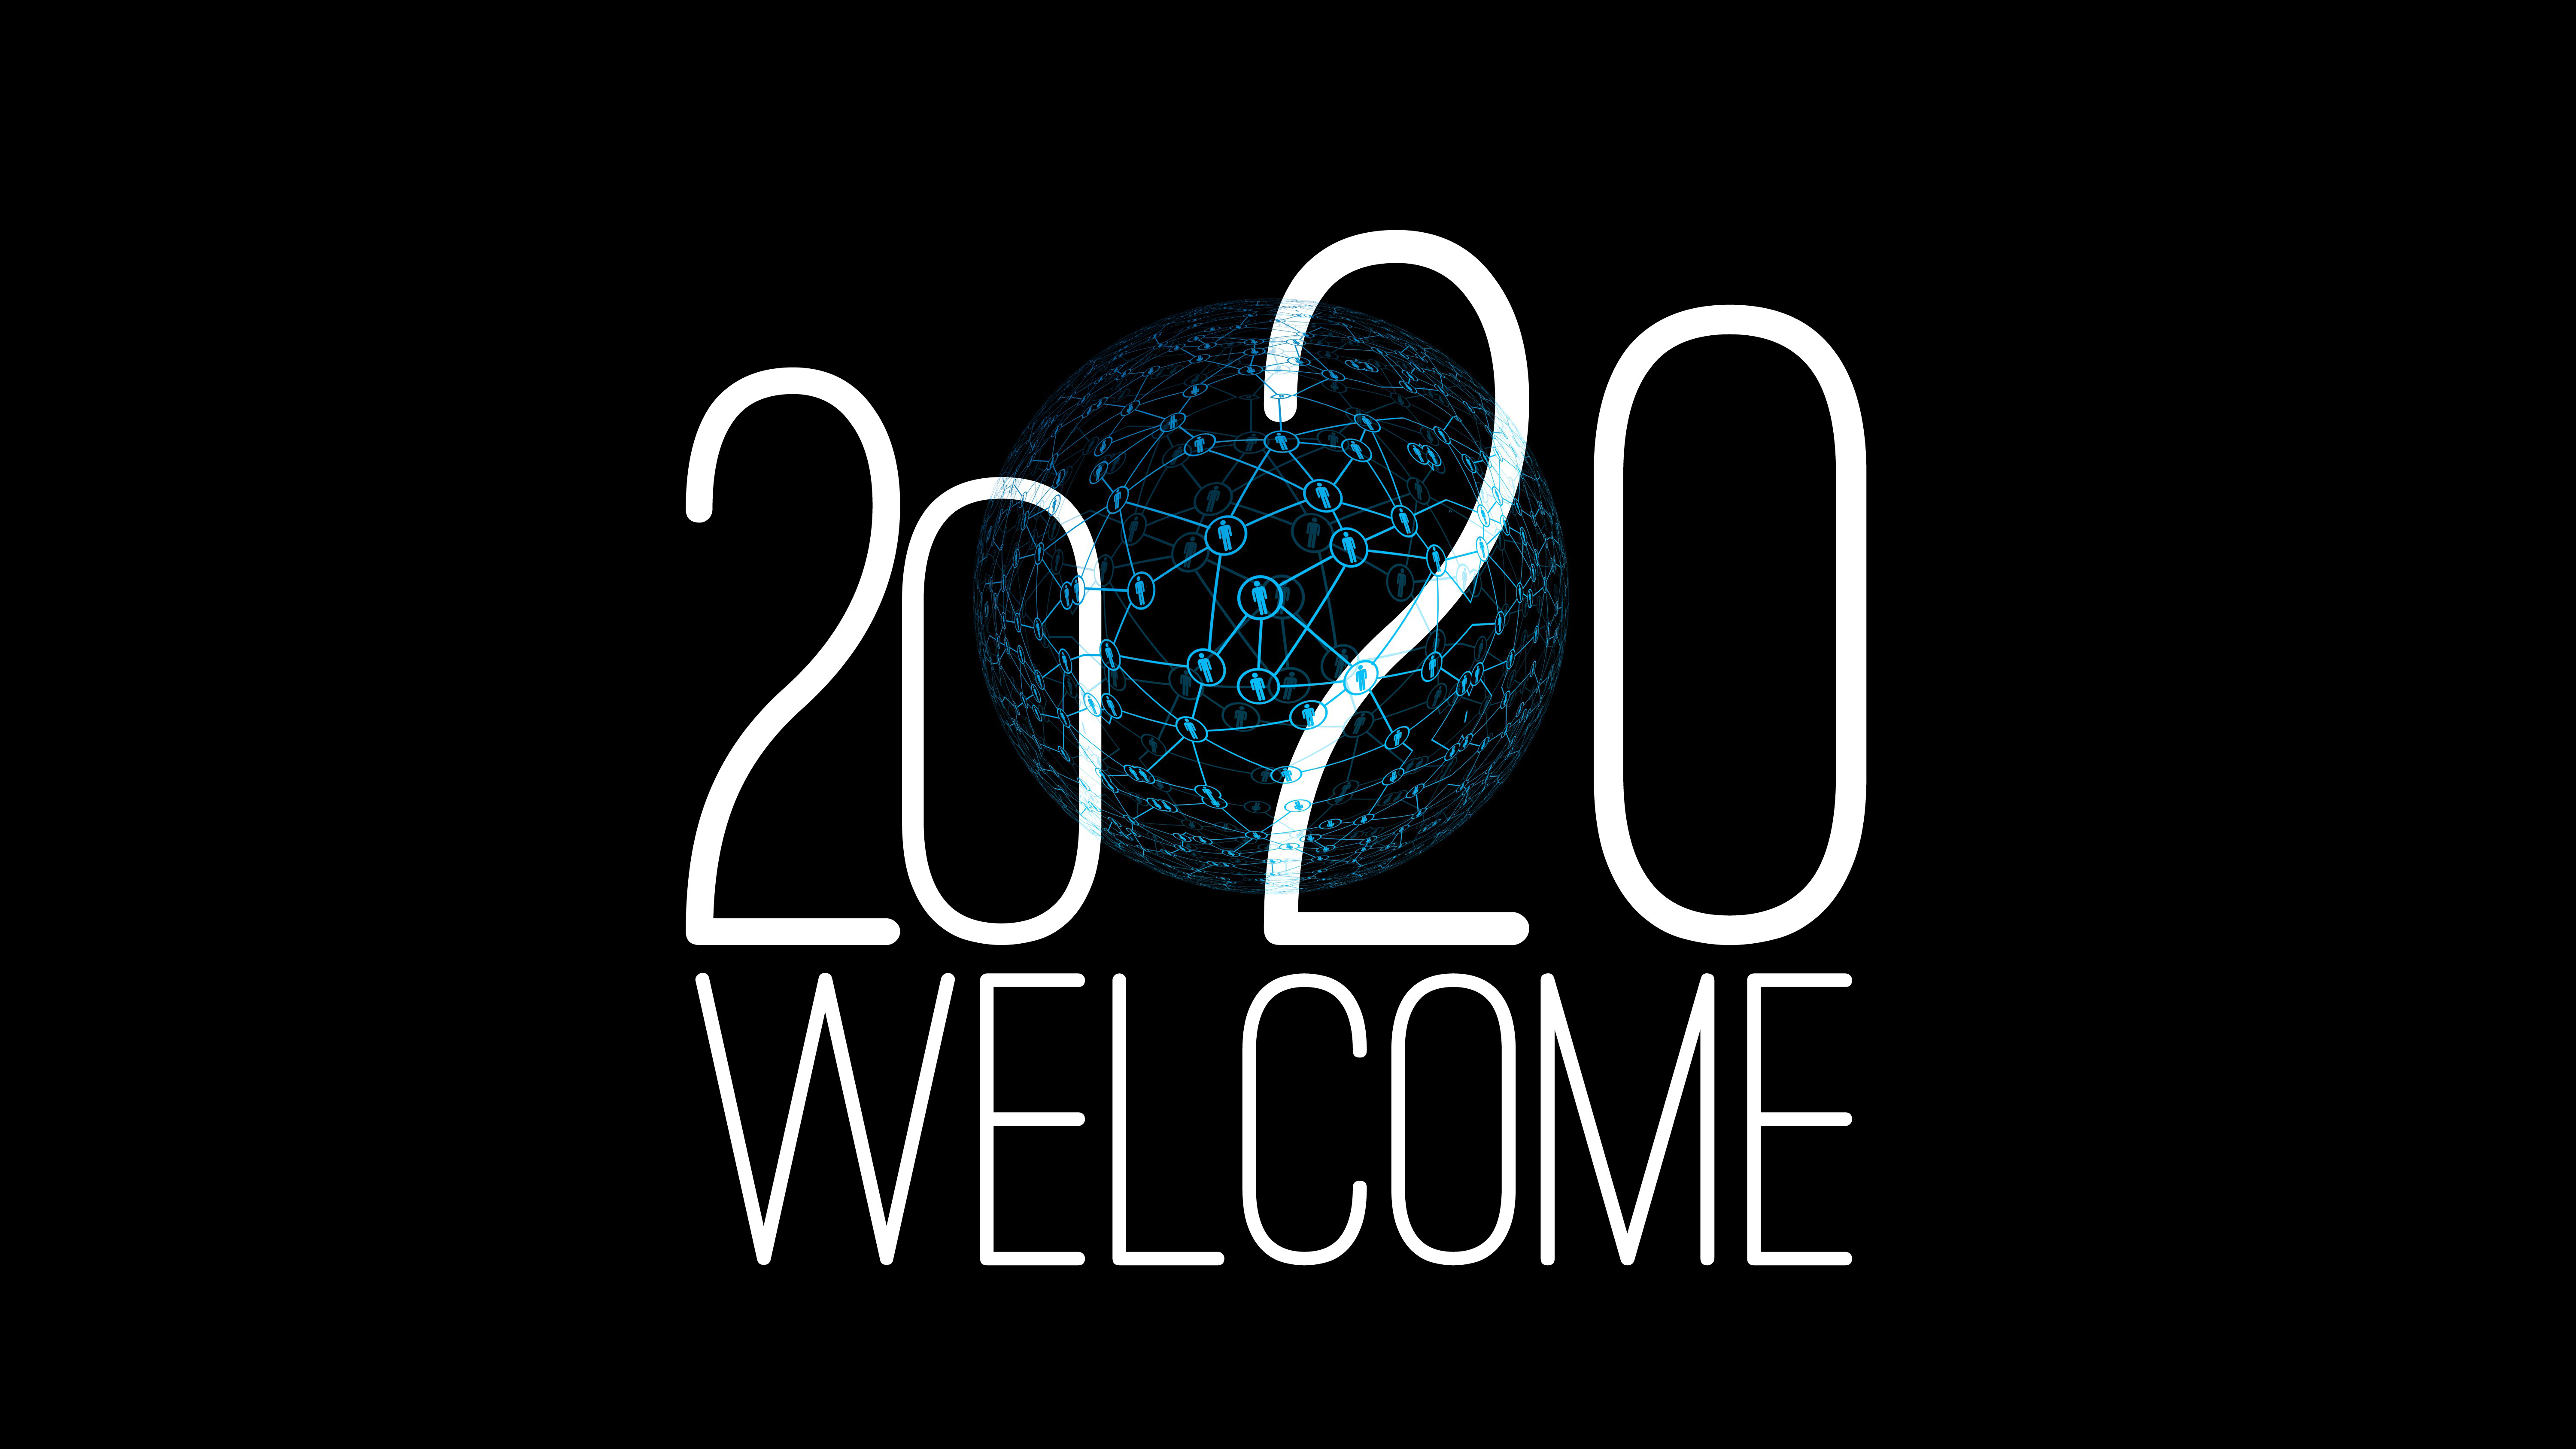 2020 Welcome New Year 5K